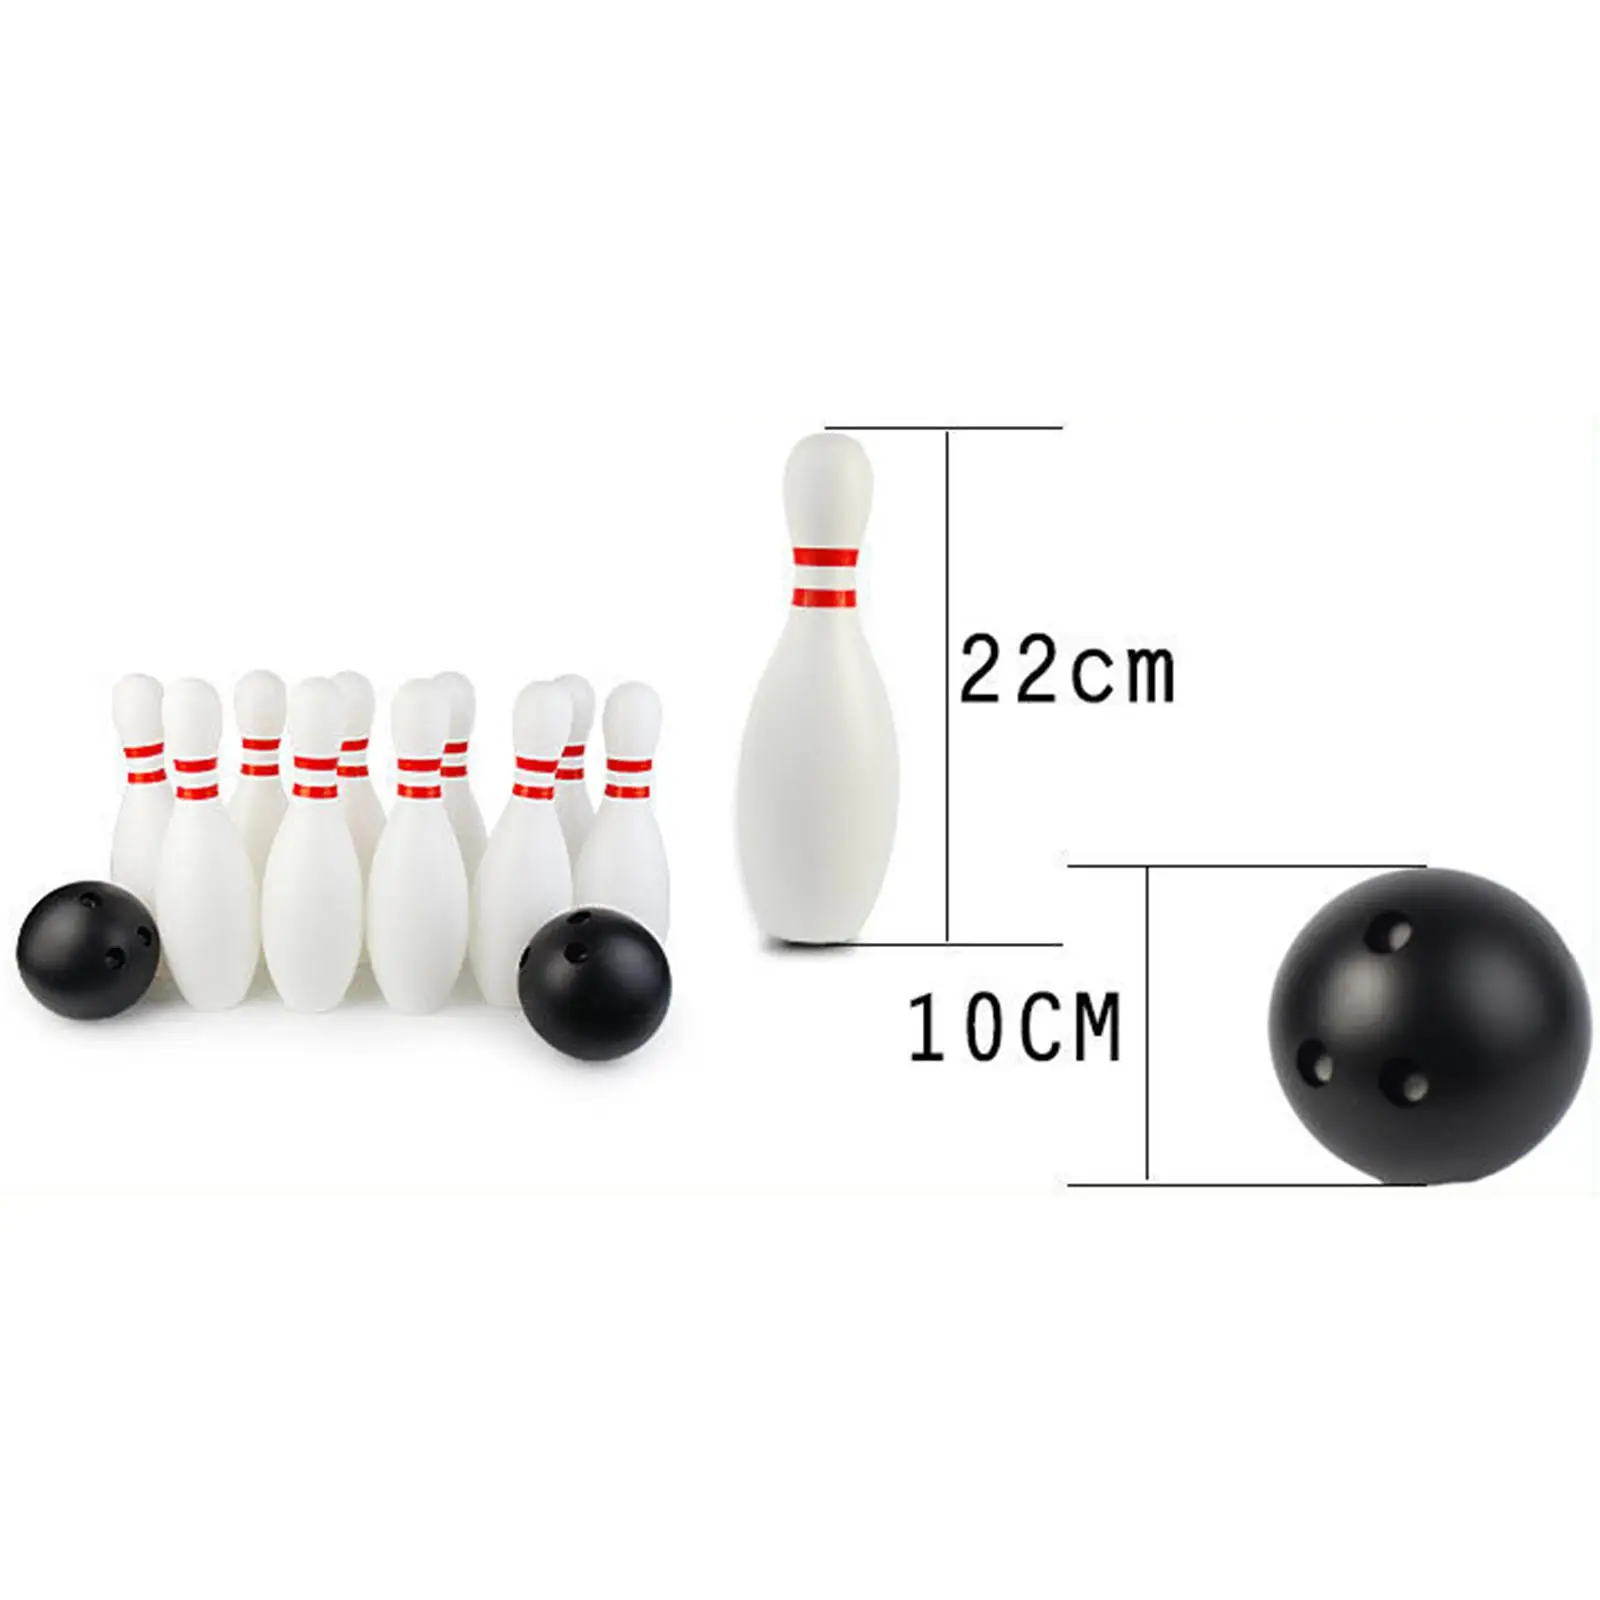 Kids Bowling Set Fun 10 Bowling Pin and 2 Balls for Ages 3 4 5 Kindergarten